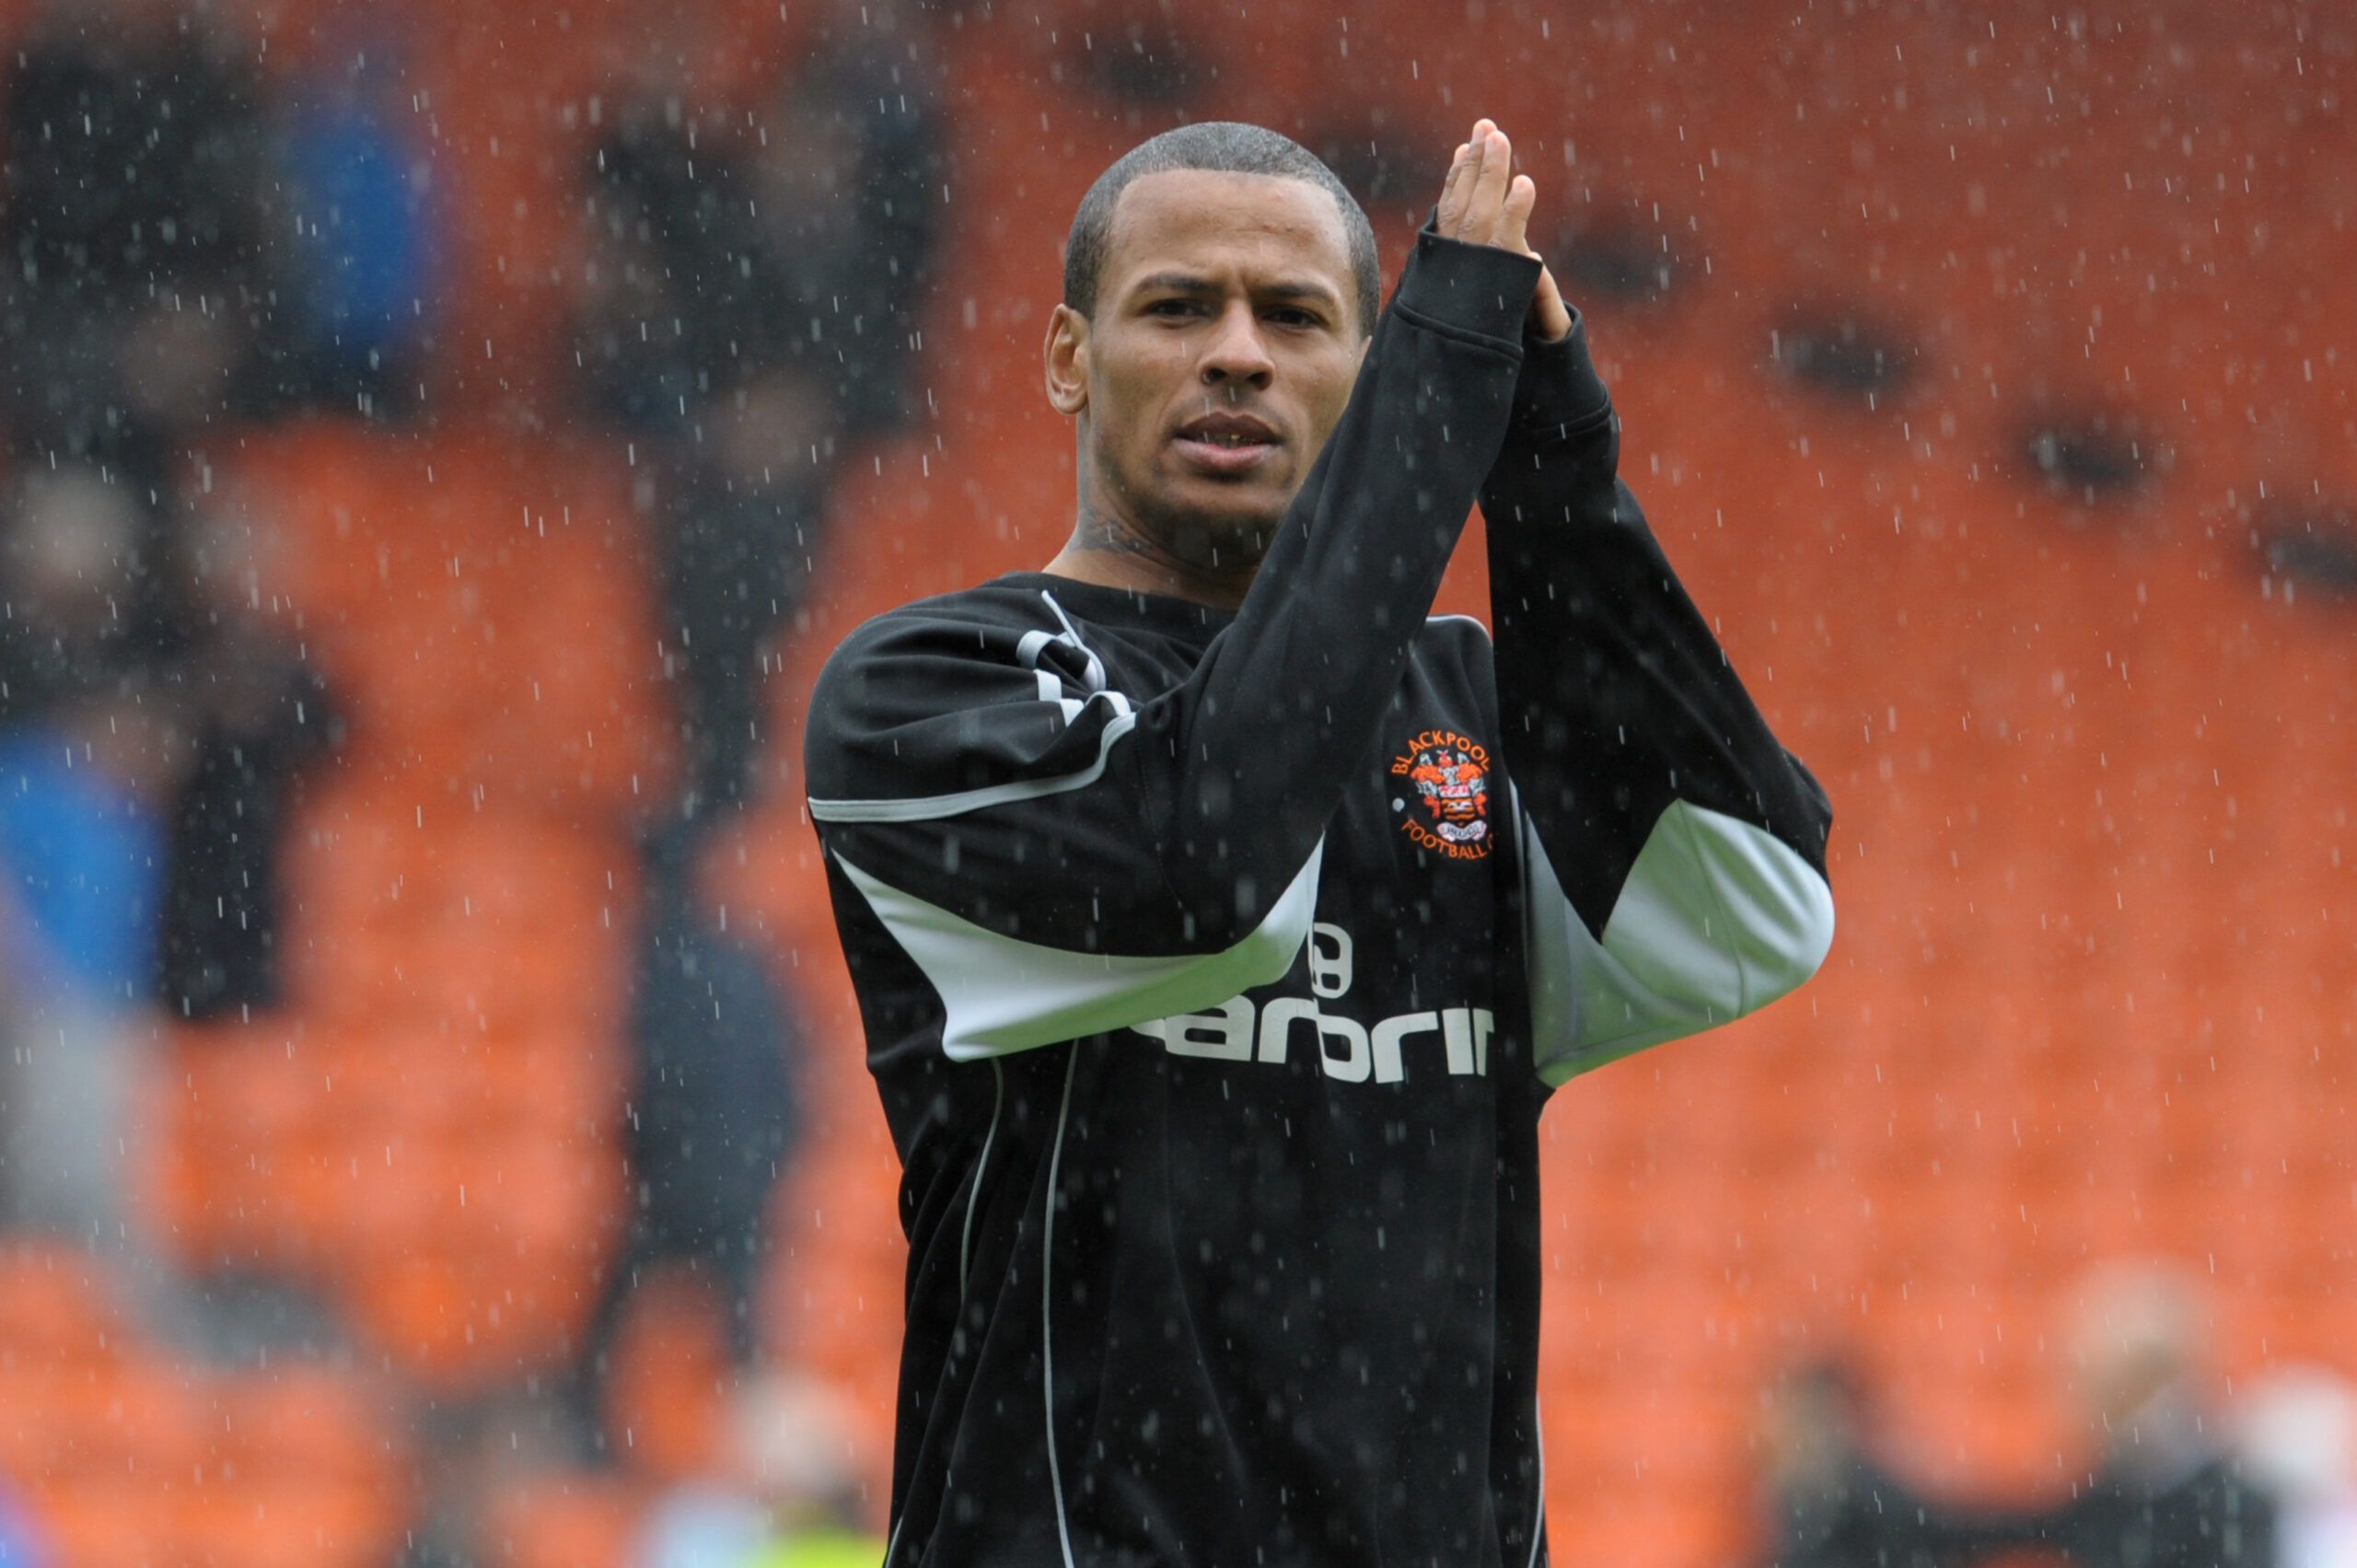 Football - Blackpool v Bolton Wanderers - Barclays Premier League - Bloomfield Road - 10/11 - 14/5/11 
DJ Campbell - Blackpool applauds fans during lap of appreciation 
Mandatory Credit: Action Images / Paul Currie 
NO ONLINE/INTERNET USE WITHOUT A LICENCE FROM THE FOOTBALL DATA CO LTD. FOR LICENCE ENQUIRIES PLEASE TELEPHONE +44 (0) 207 864 9000.